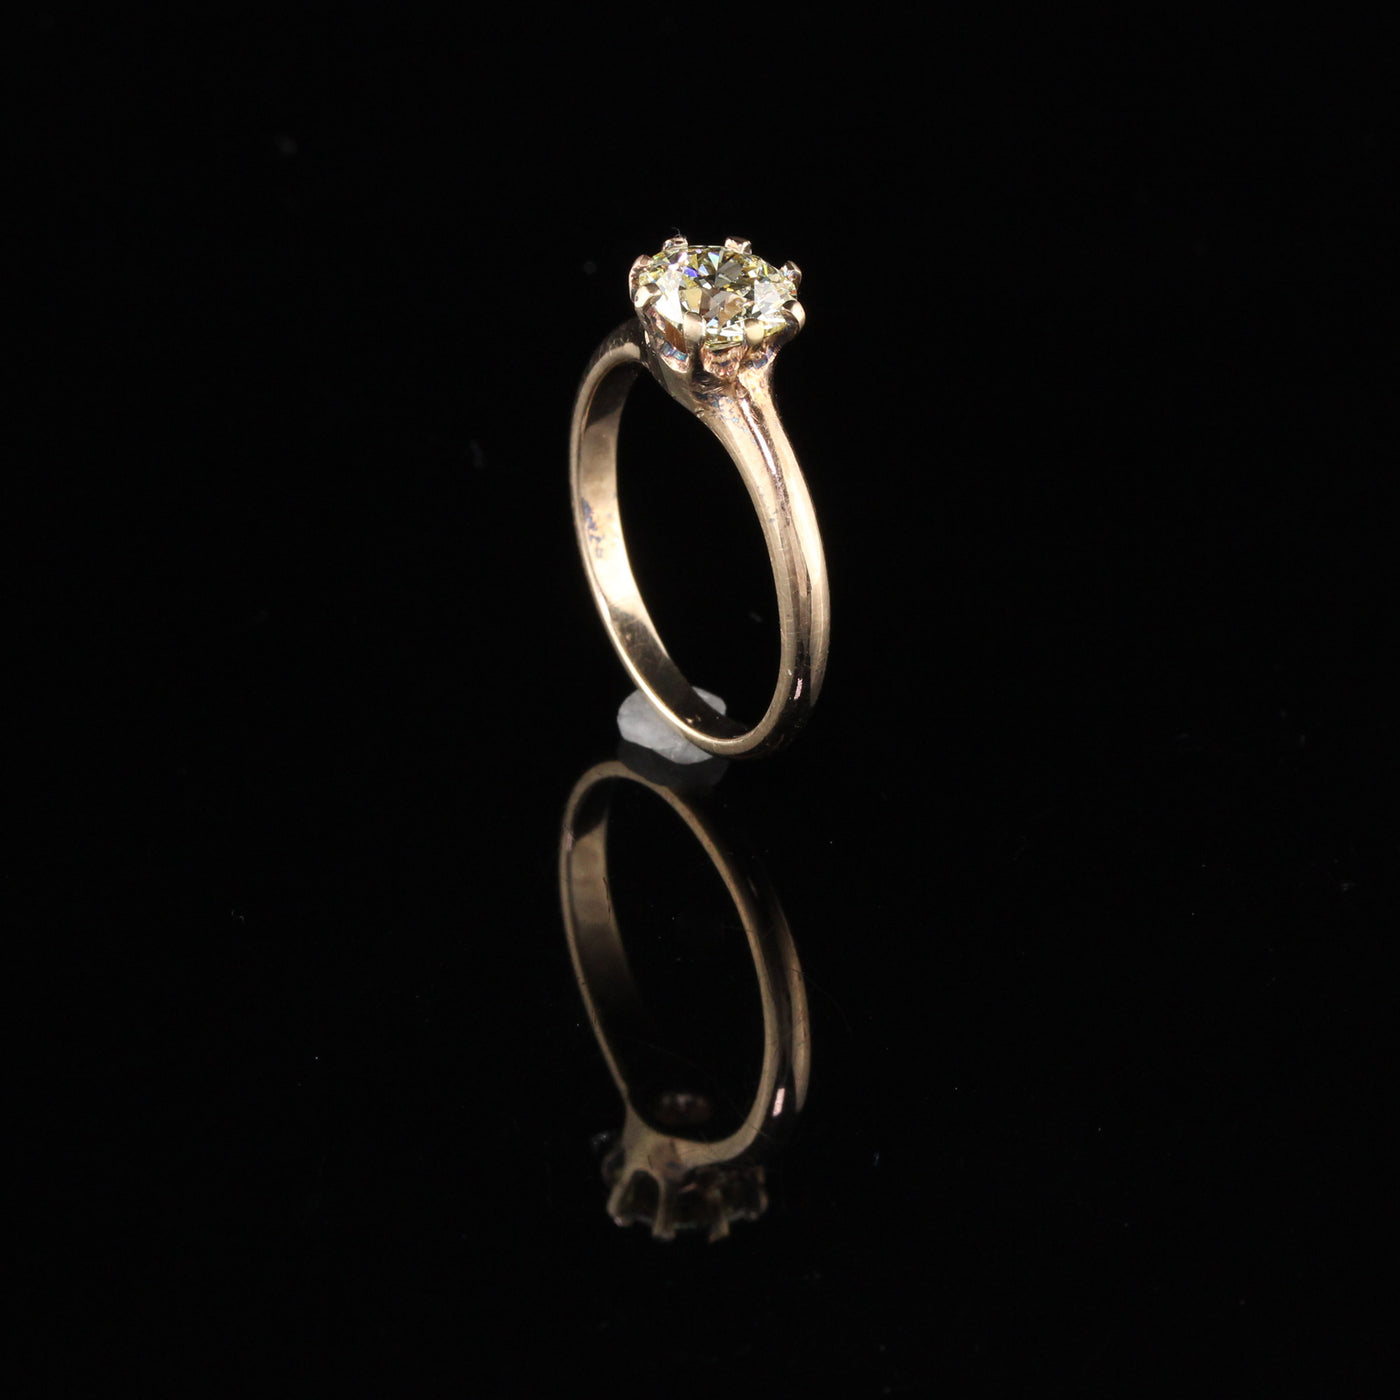 Antique Victorian 14K Yellow Gold Solitaire Diamond Engagement Ring